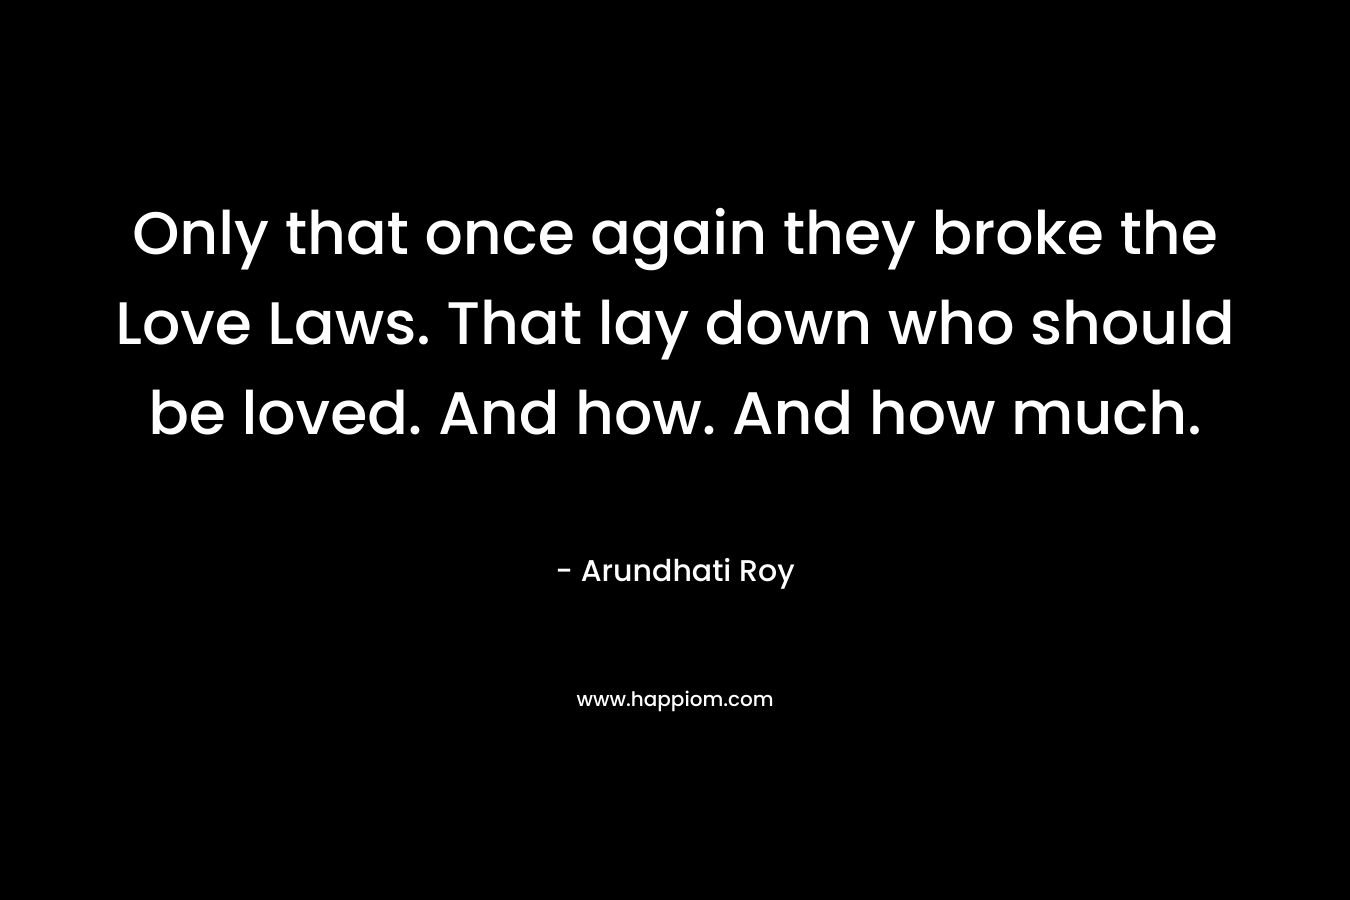 Only that once again they broke the Love Laws. That lay down who should be loved. And how. And how much. – Arundhati Roy